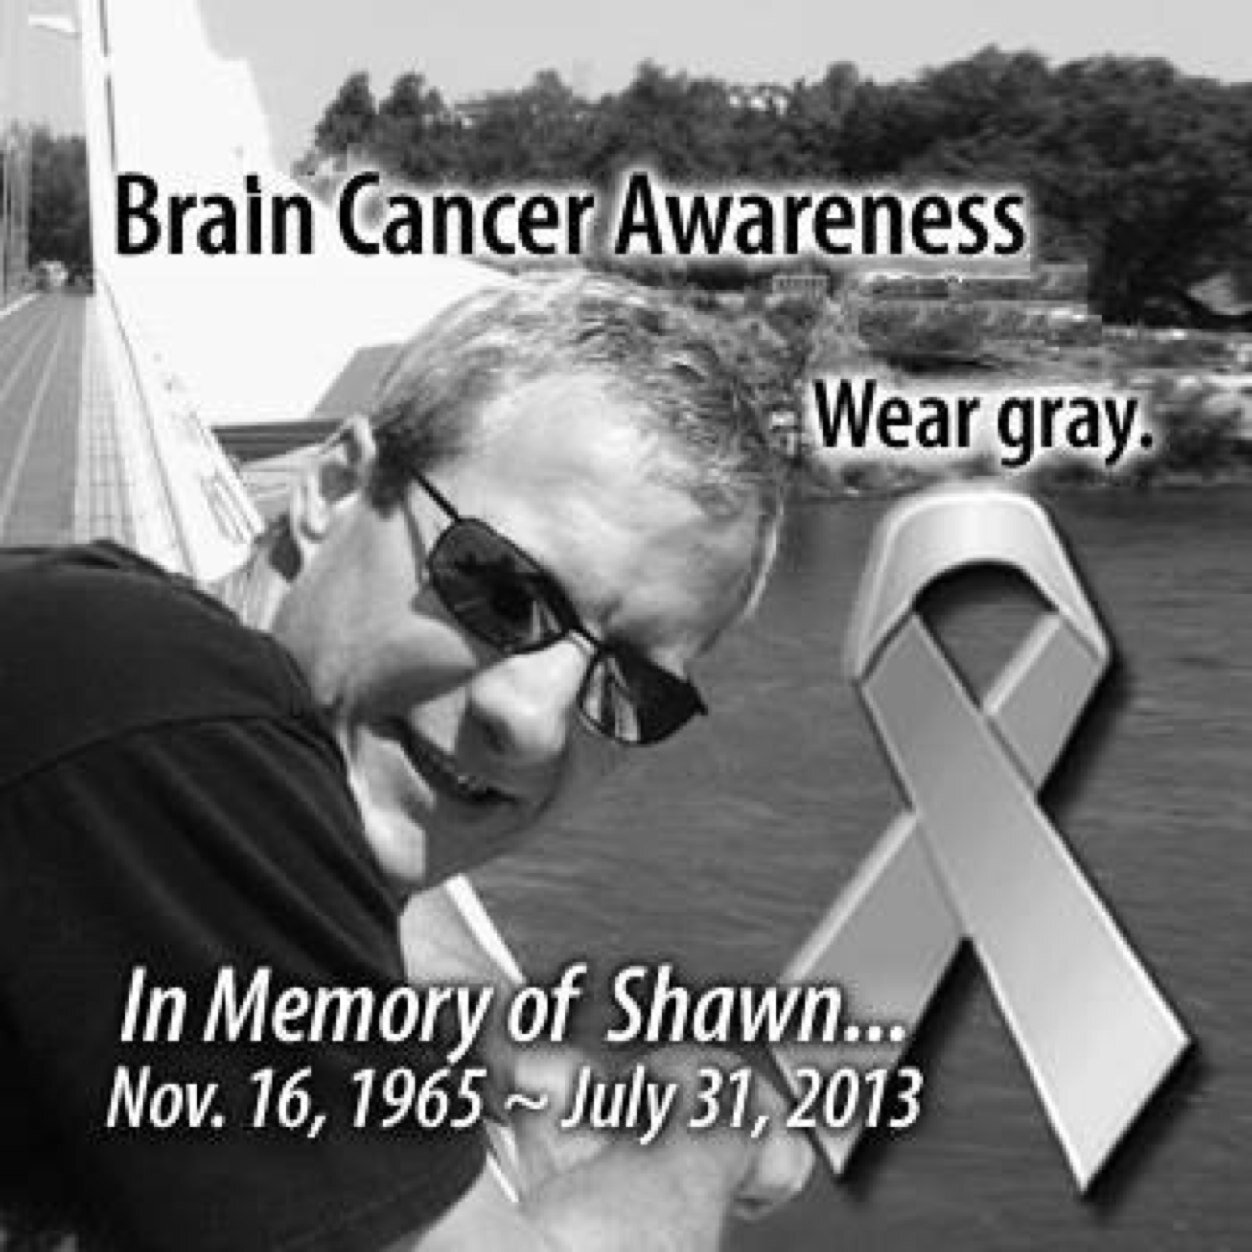 @GBM_WARRIOR is his widow, working to raise awareness about brain cancer. We need a cure. Gray Matters 365 to me. #graymatters365